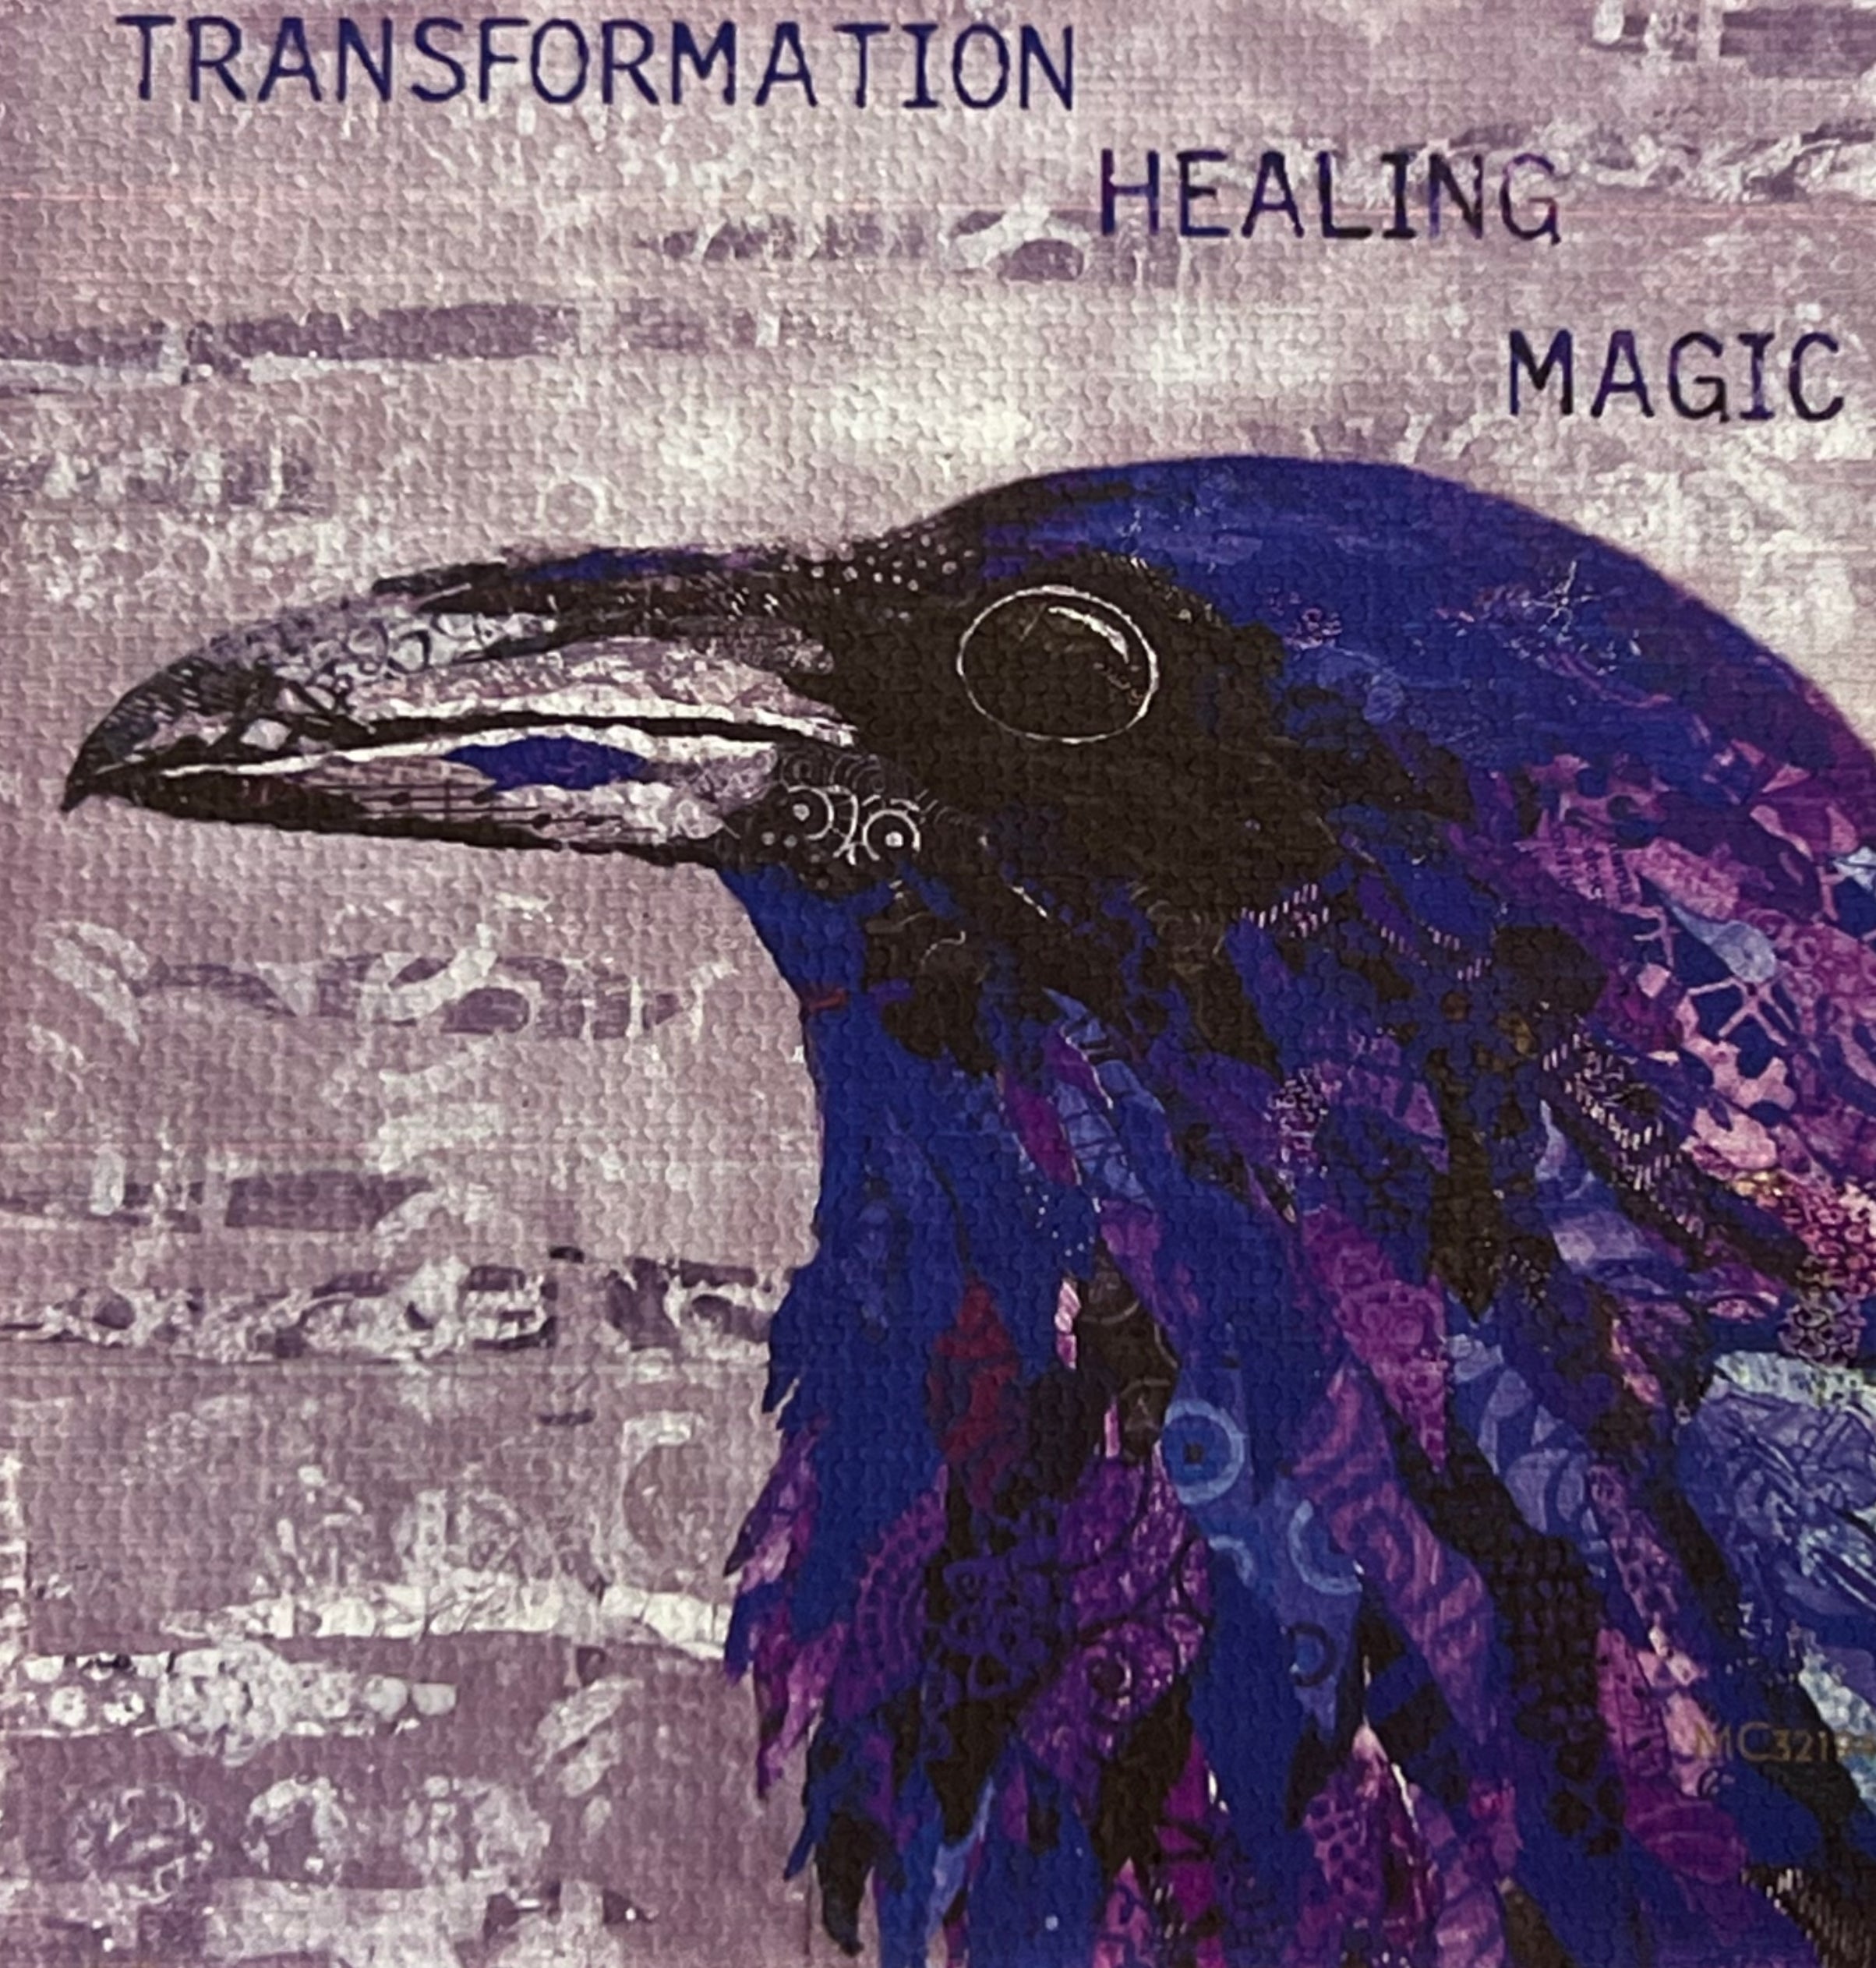 Square magnet wit image of raven head and written message Healing Raven  Magnet 